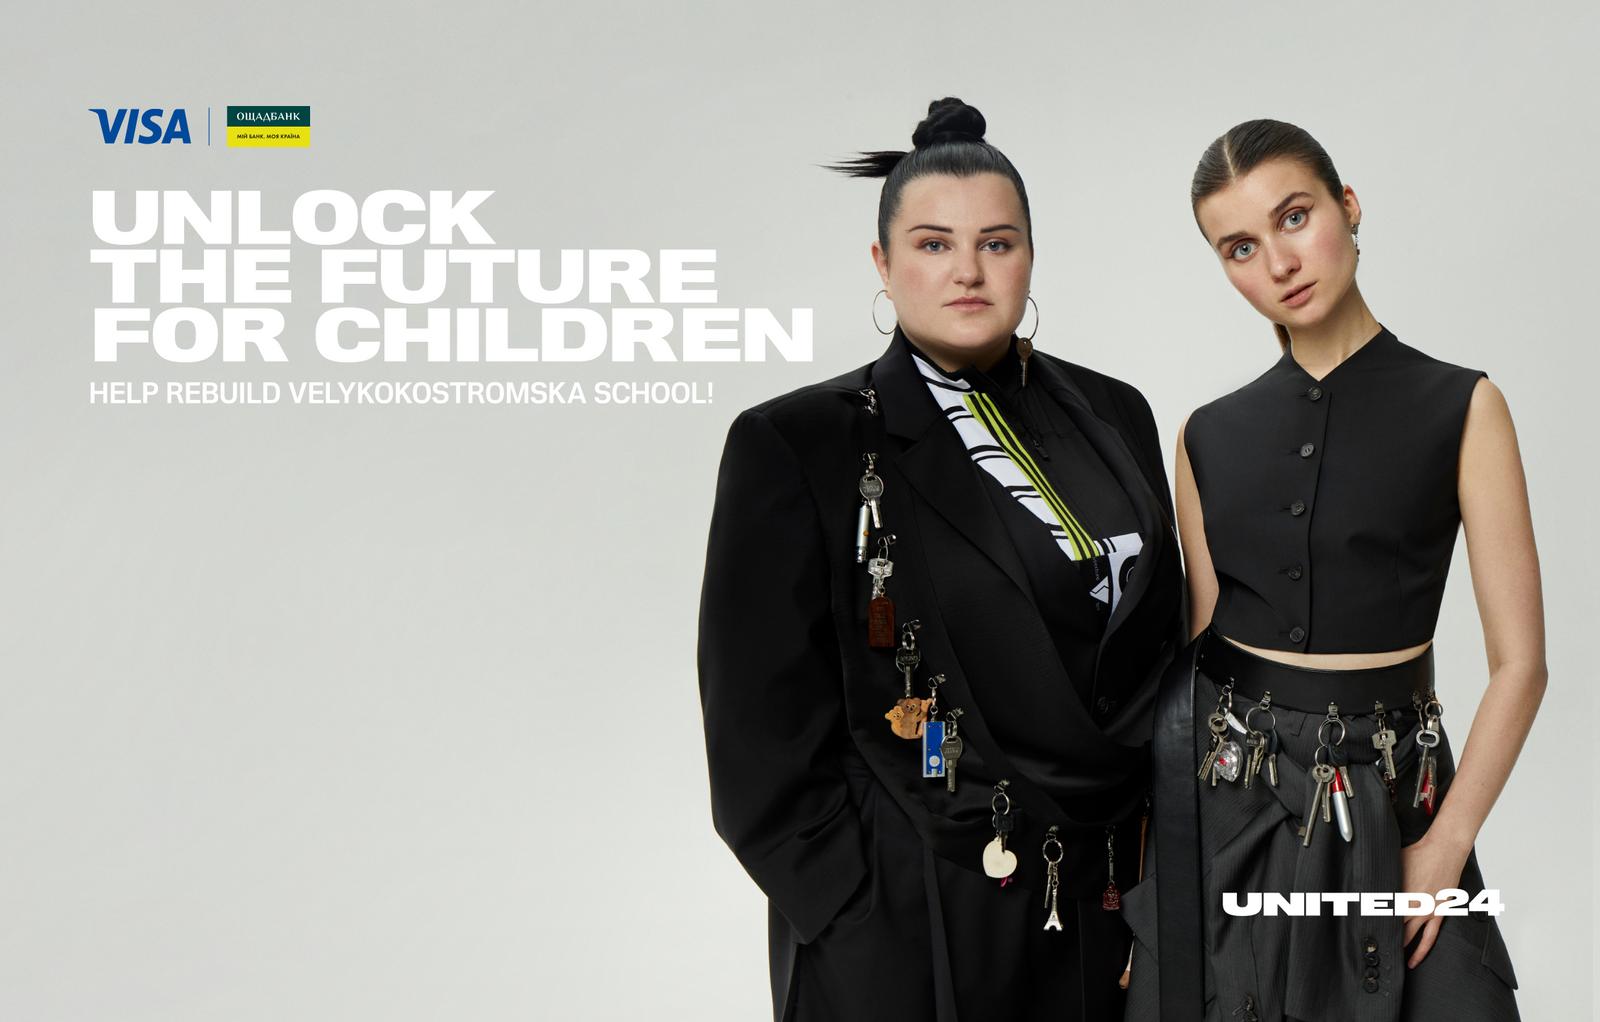 “Unlock the future for children” is a joint UNITED24 fundraiser with alyona alyona and Jerry Heil, Visa and Oschadbank